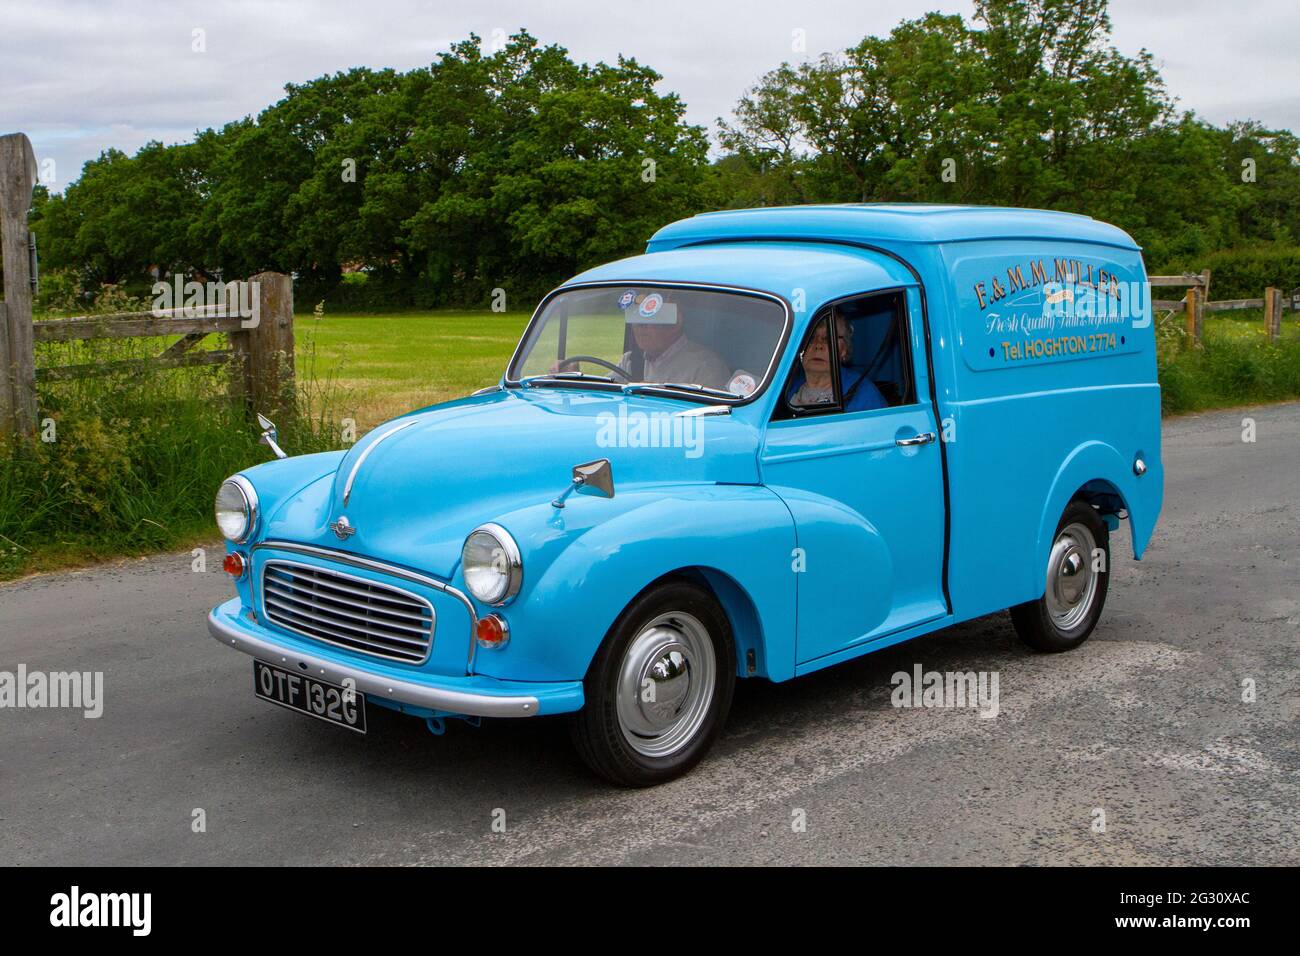 A 1969 60s Blue Morris 6 Cwt Van Annual Manchester to Blackpool Vintage & Classic Car Run The event is a ‘Touring Assembly’ Stock Photo